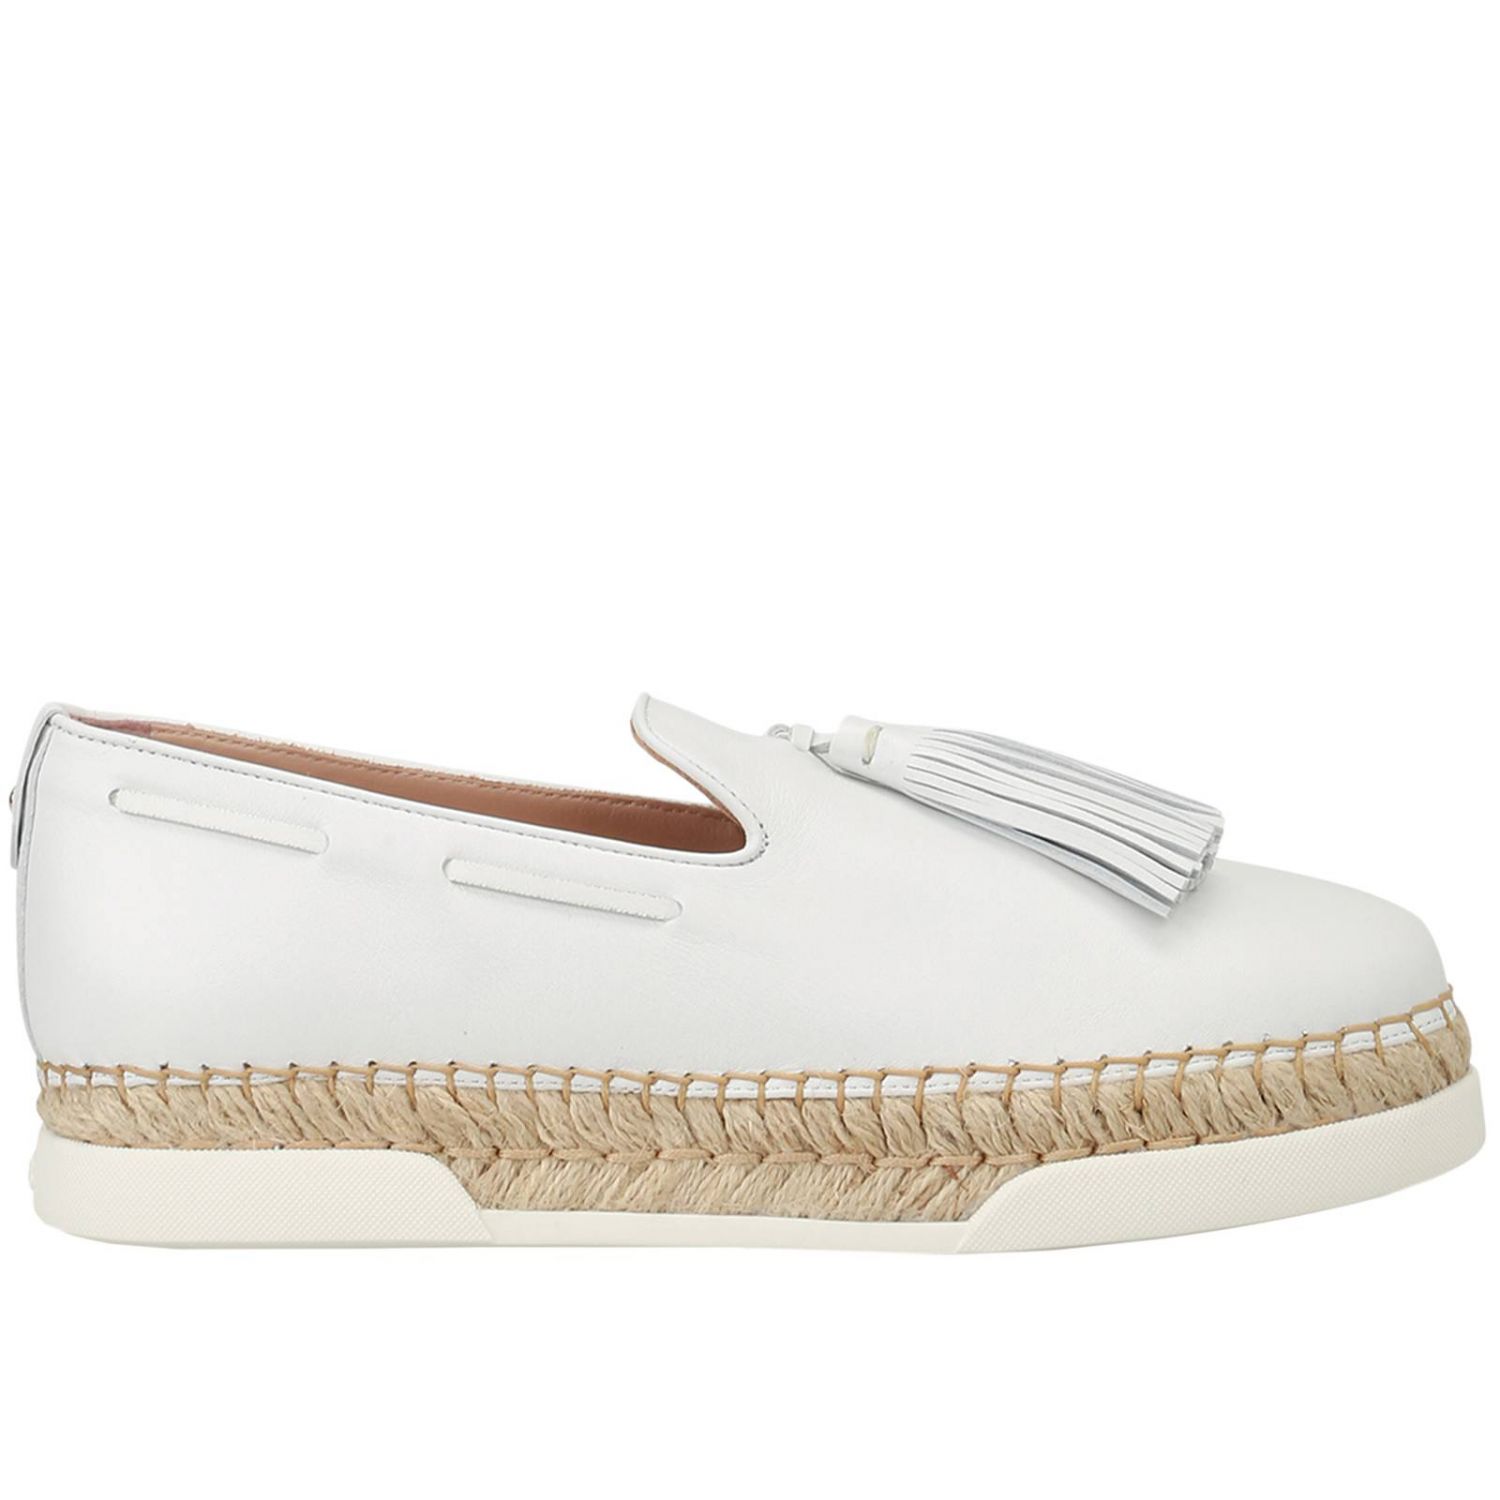 Shoes women Tod's | Wedge Shoes Tods Women White | Wedge Shoes Tods ...